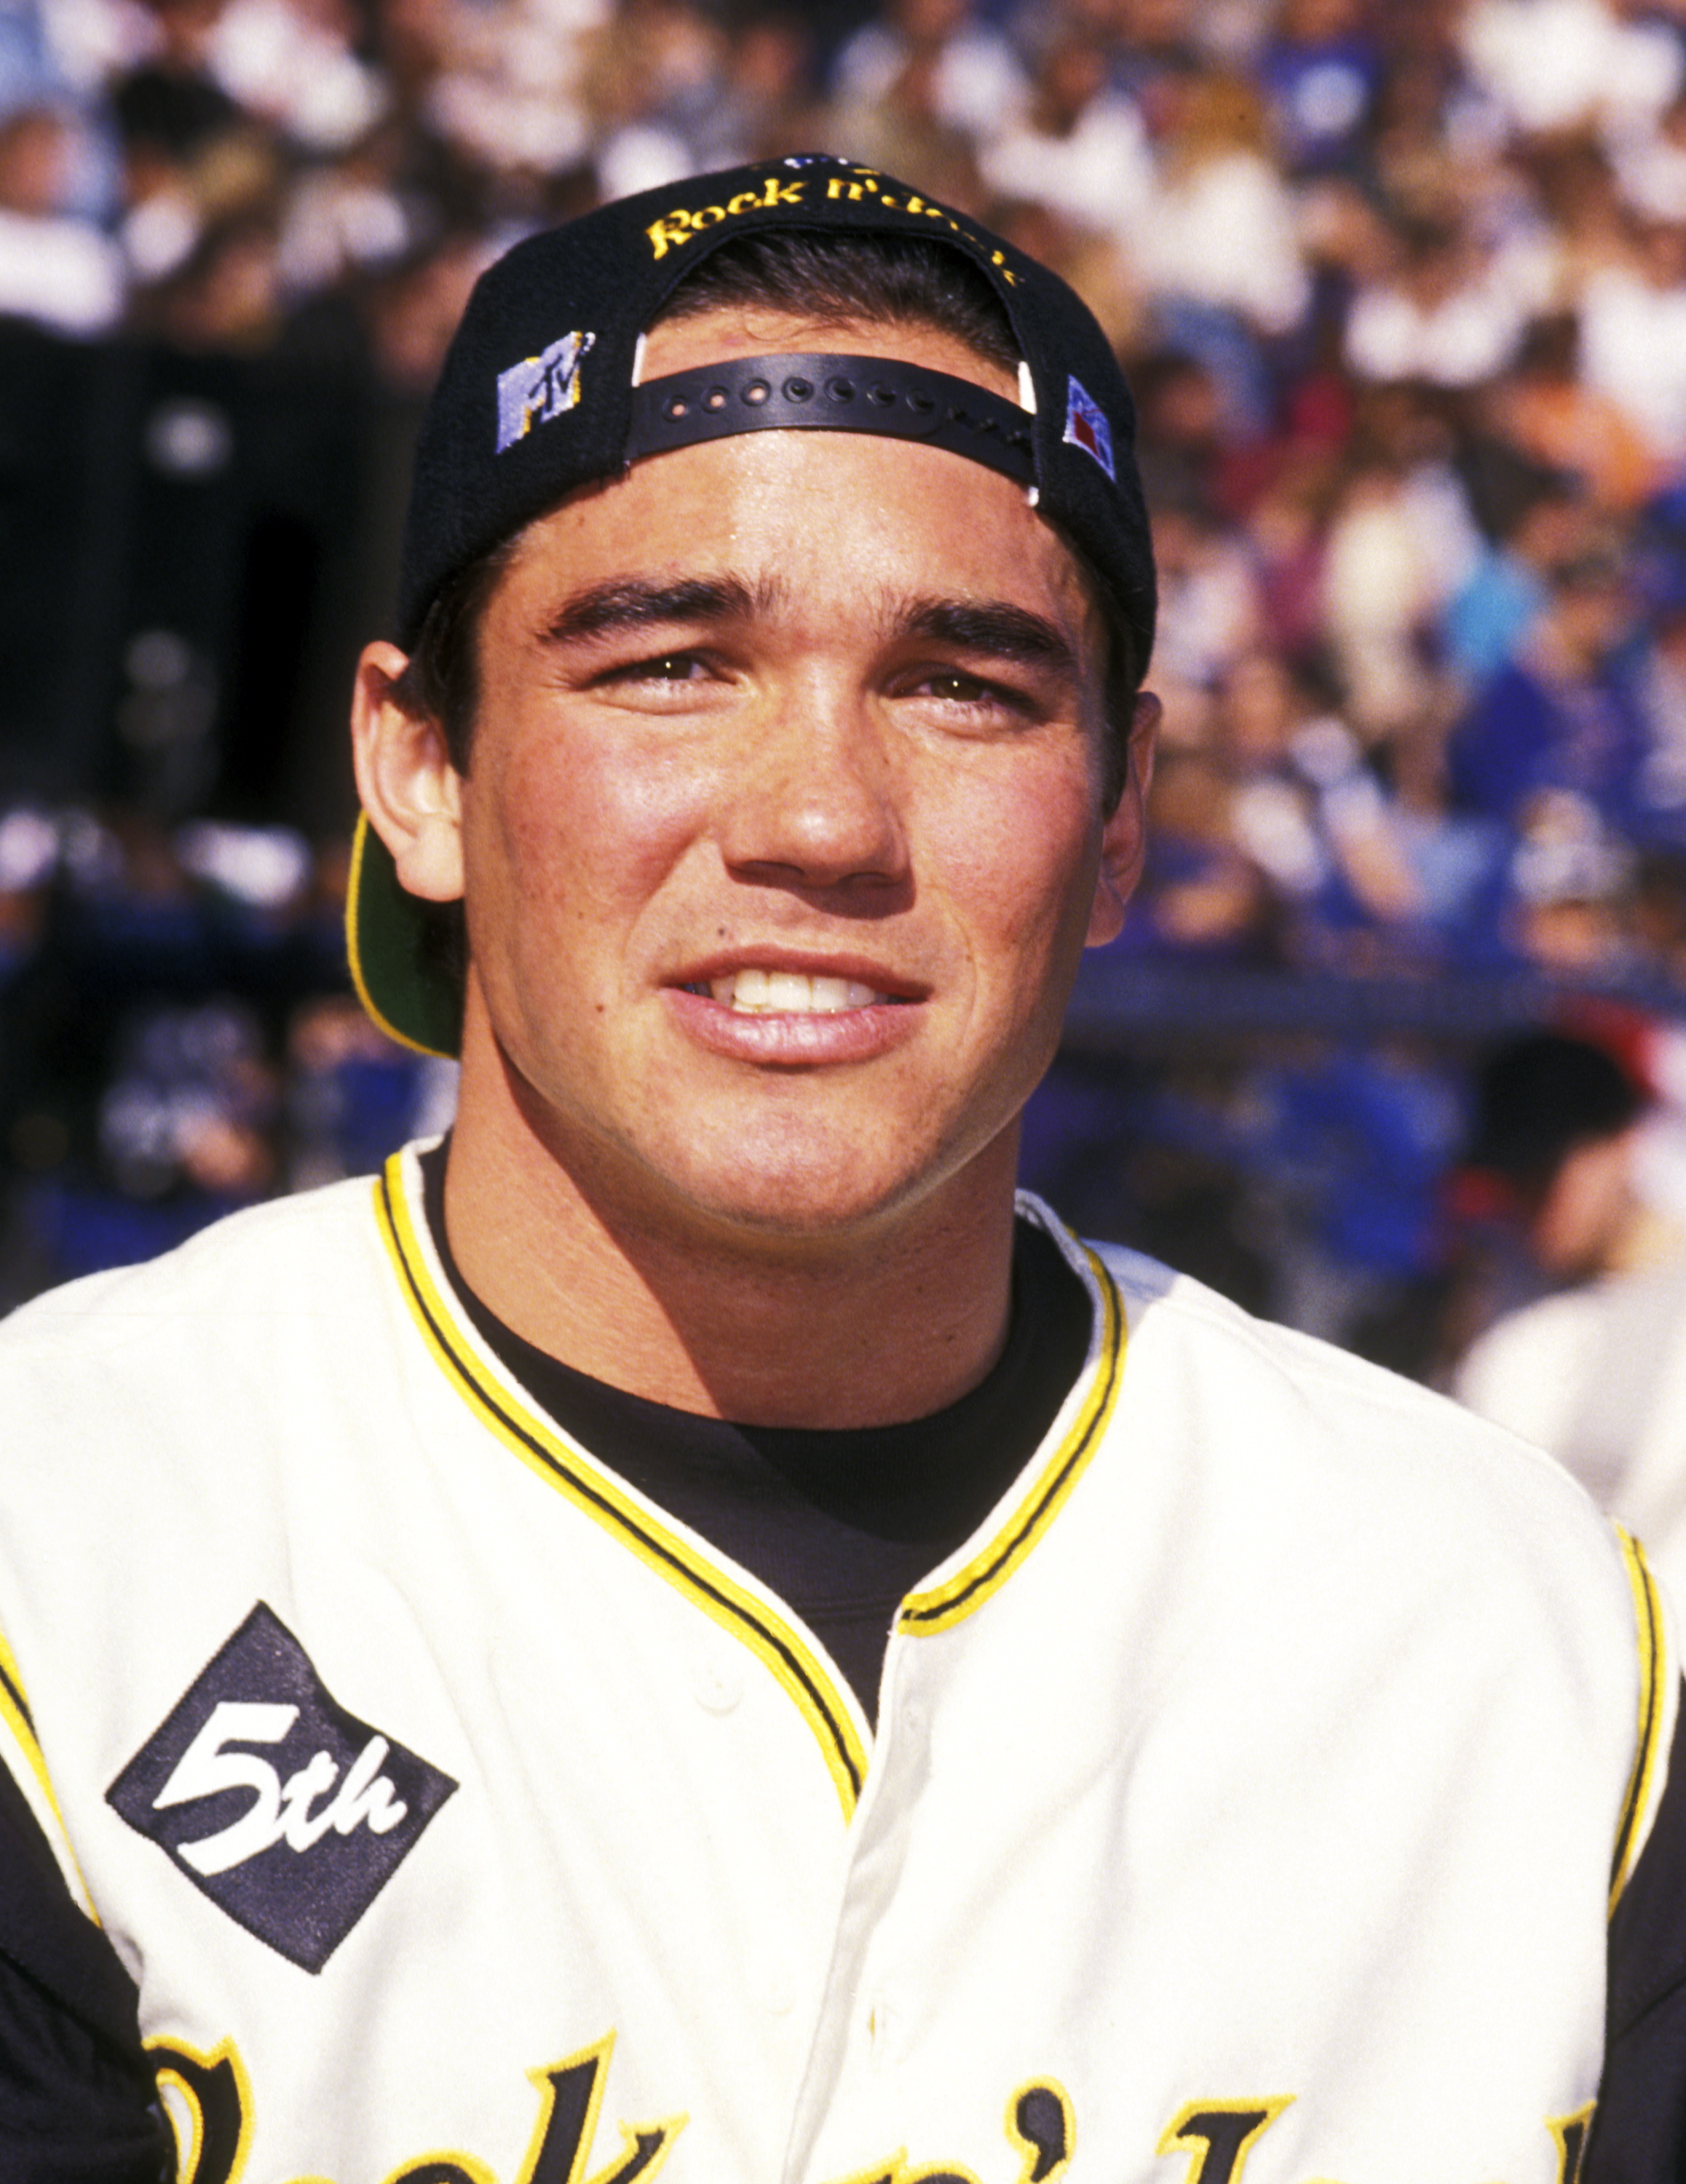 Dean Cain at the 5th Annual MTV's Rock n' Jock Baseball Game in California on January 15, 1994  | Source: Getty Images